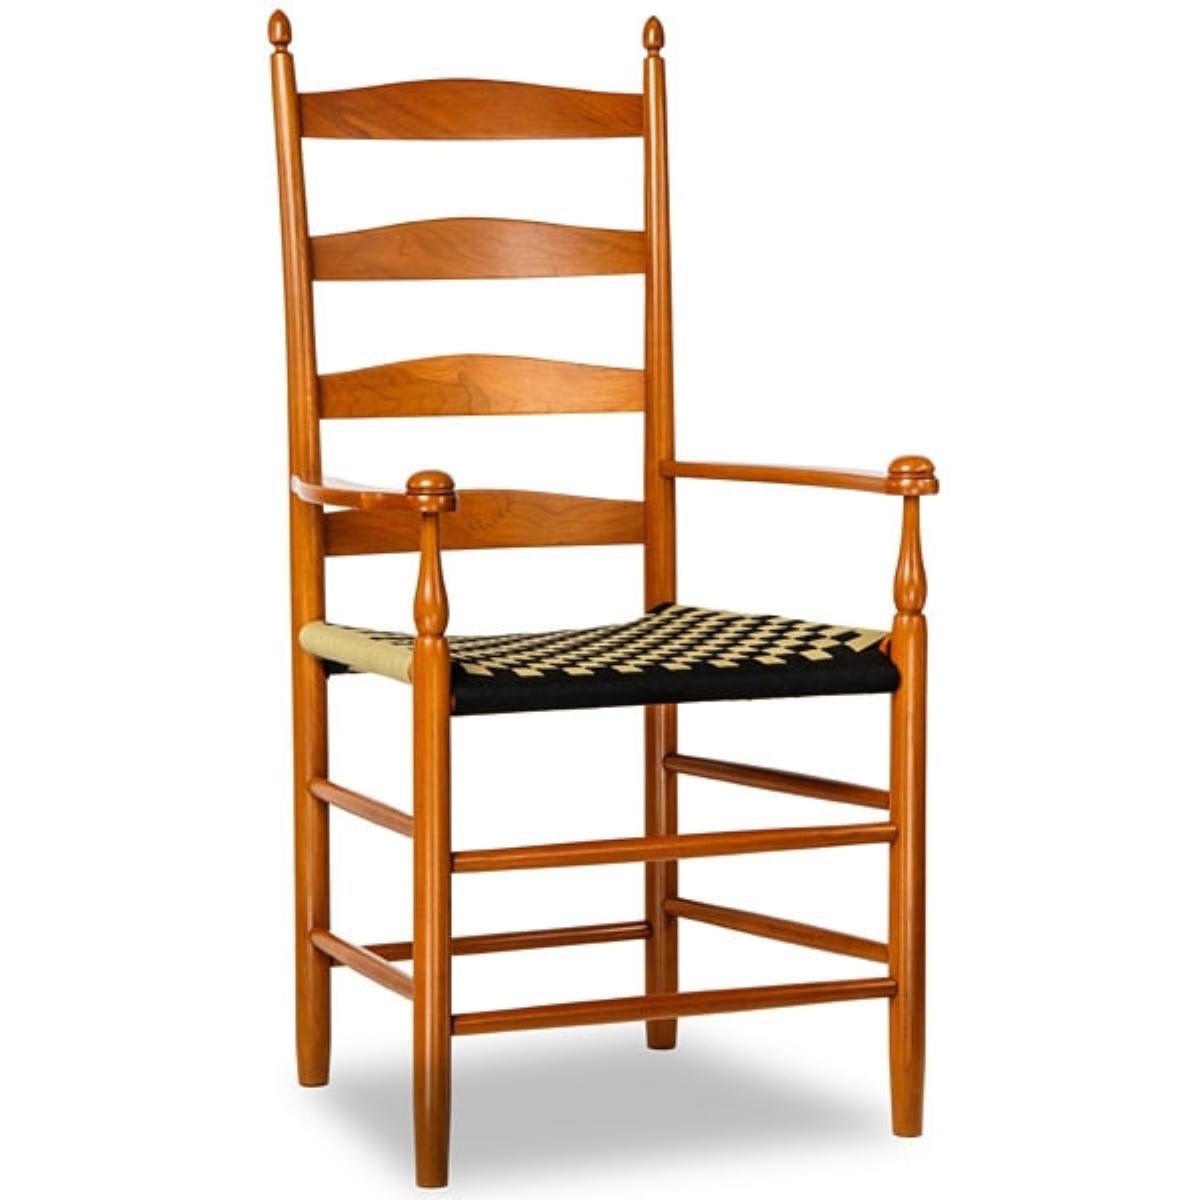 American The Shaker Ladder Slat Straight Back Arm Chair For Sale